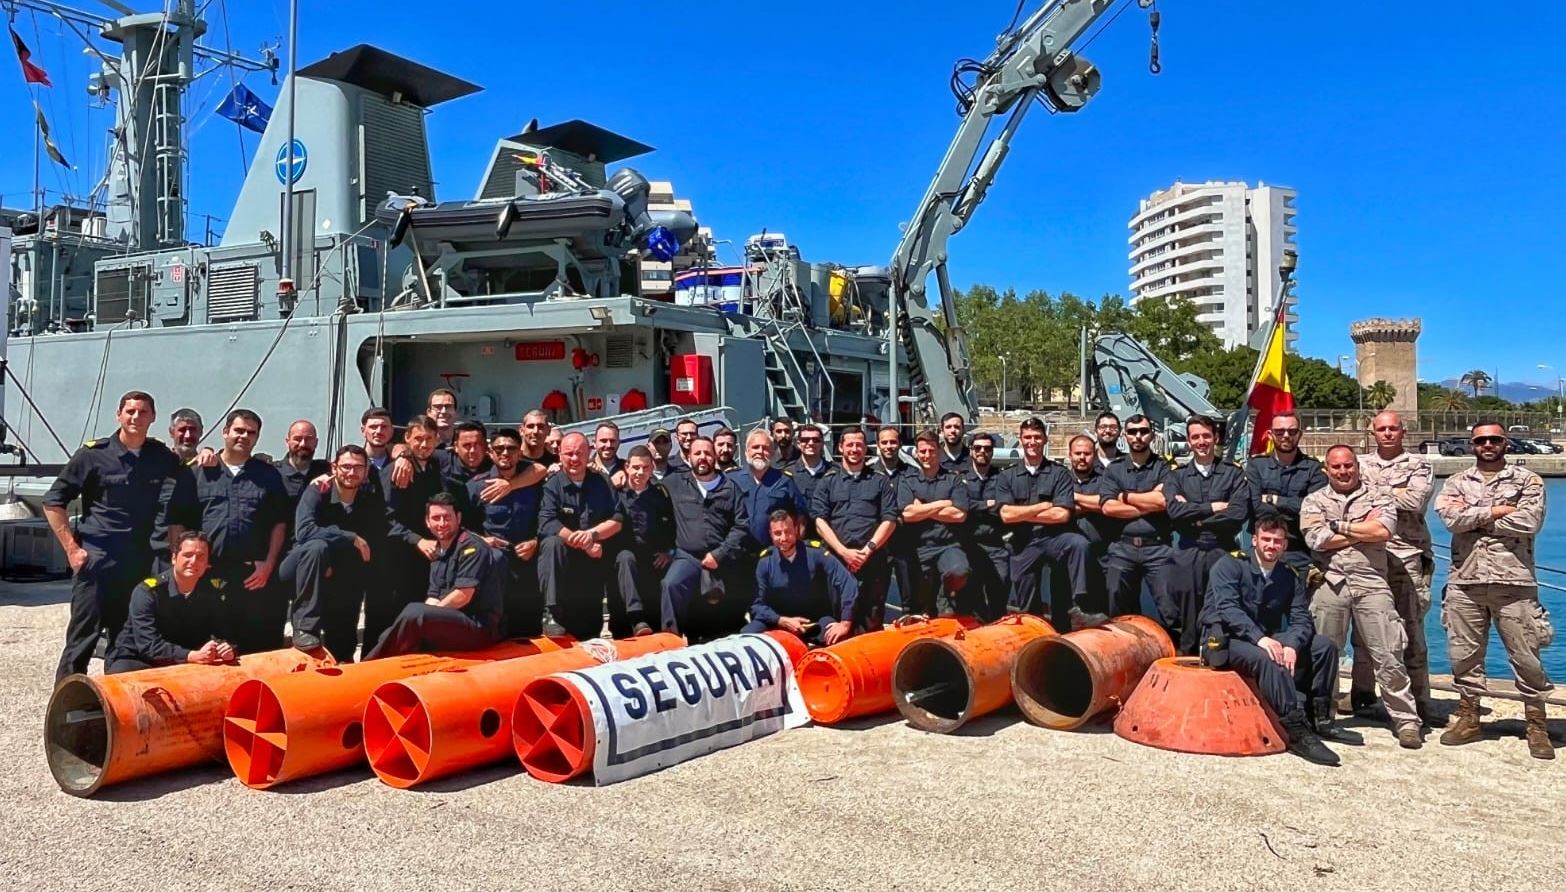 Segura' minehunter crew with part of the recovered mines